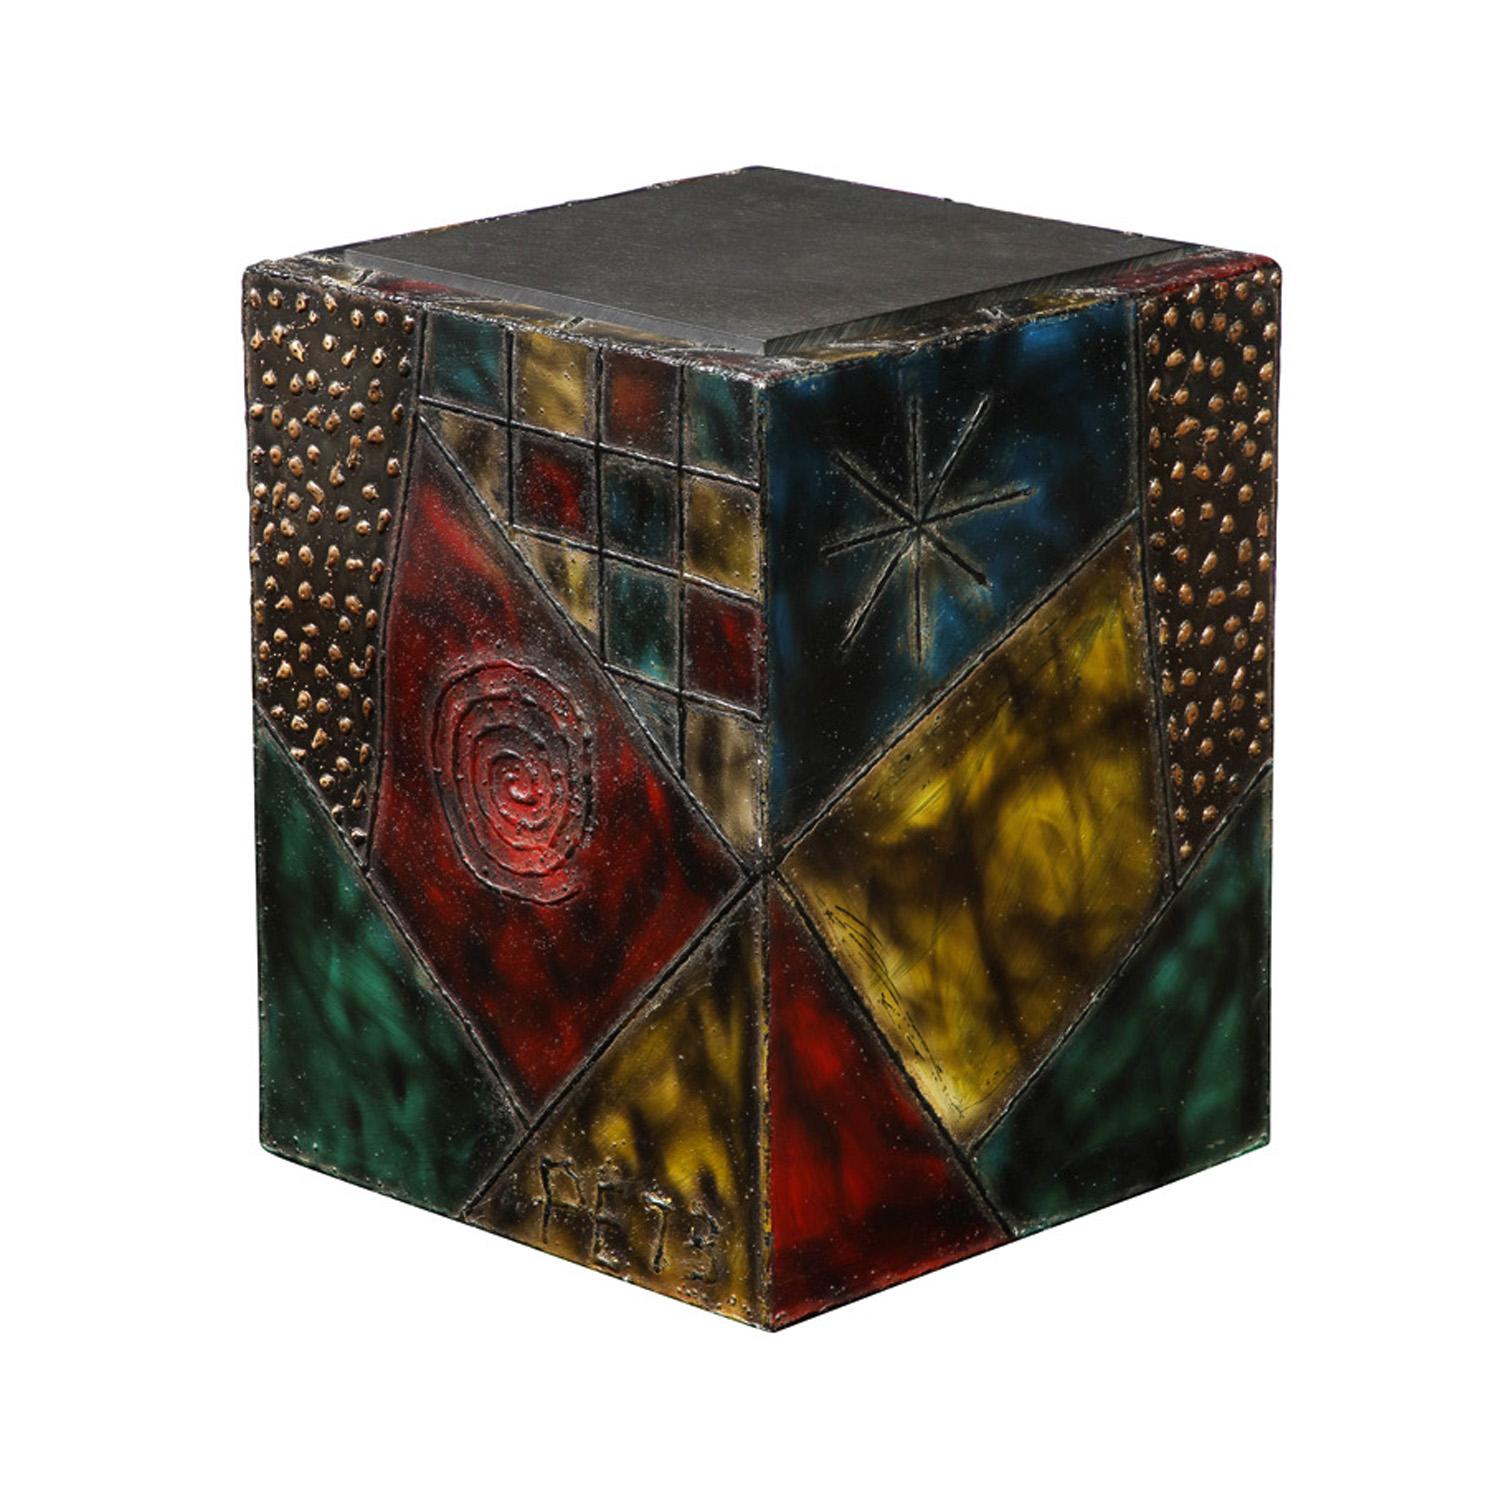 Mid-Century Modern Paul Evans Hand-Welded Cube Table with Polychrome Enamels 1973 'Signed'